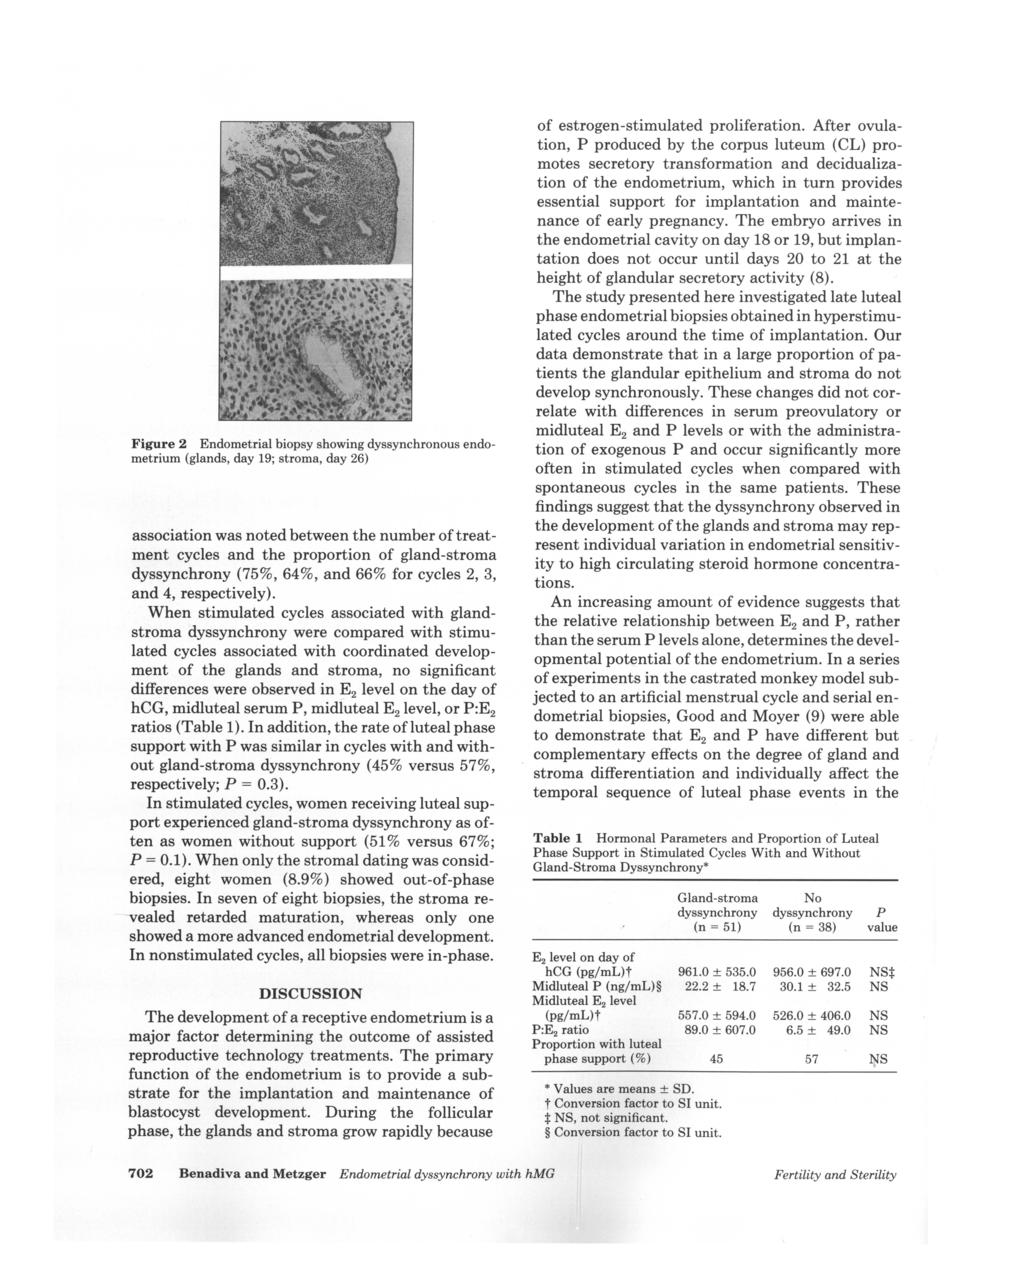 Figure 2 Endometrial biopsy showing dyssynchronous endometrium (glands, day 19; stroma, day 26) association was noted between the number of treatment cycles and the proportion of gland-stroma